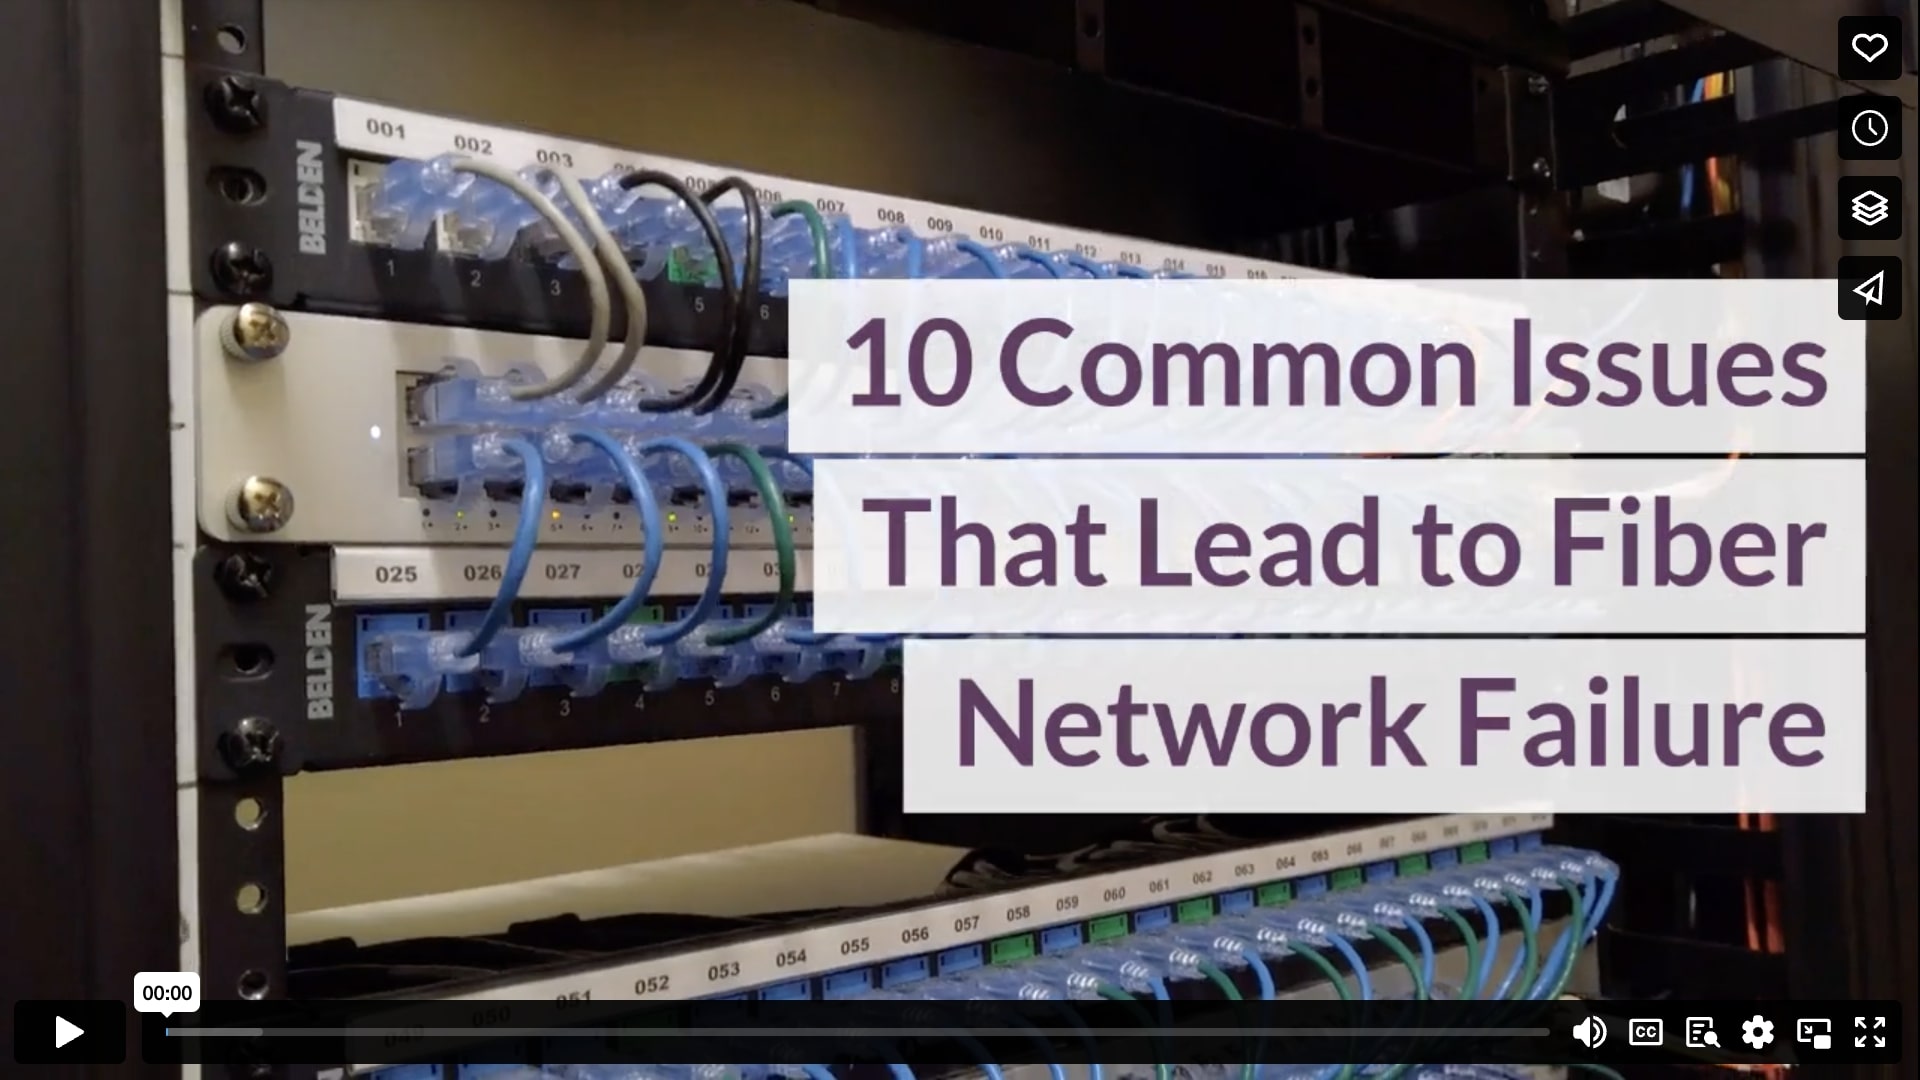 10 Common Issues That Lead to Fiber Network Failure